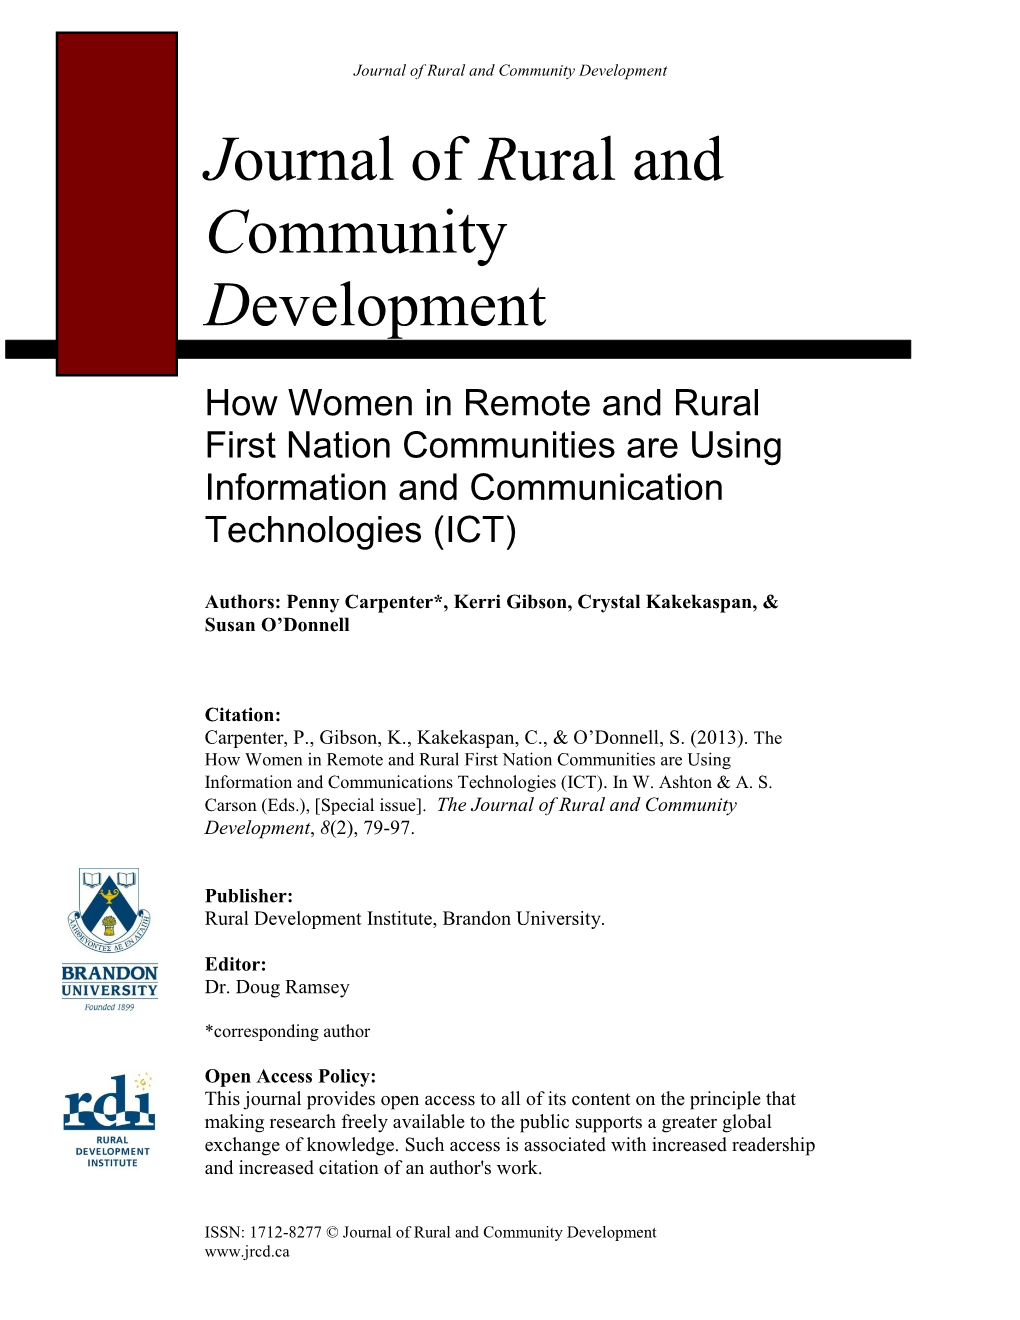 How Women in Remote and Rural First Nation Communities Are Using Information and Communication Technologies (ICT)